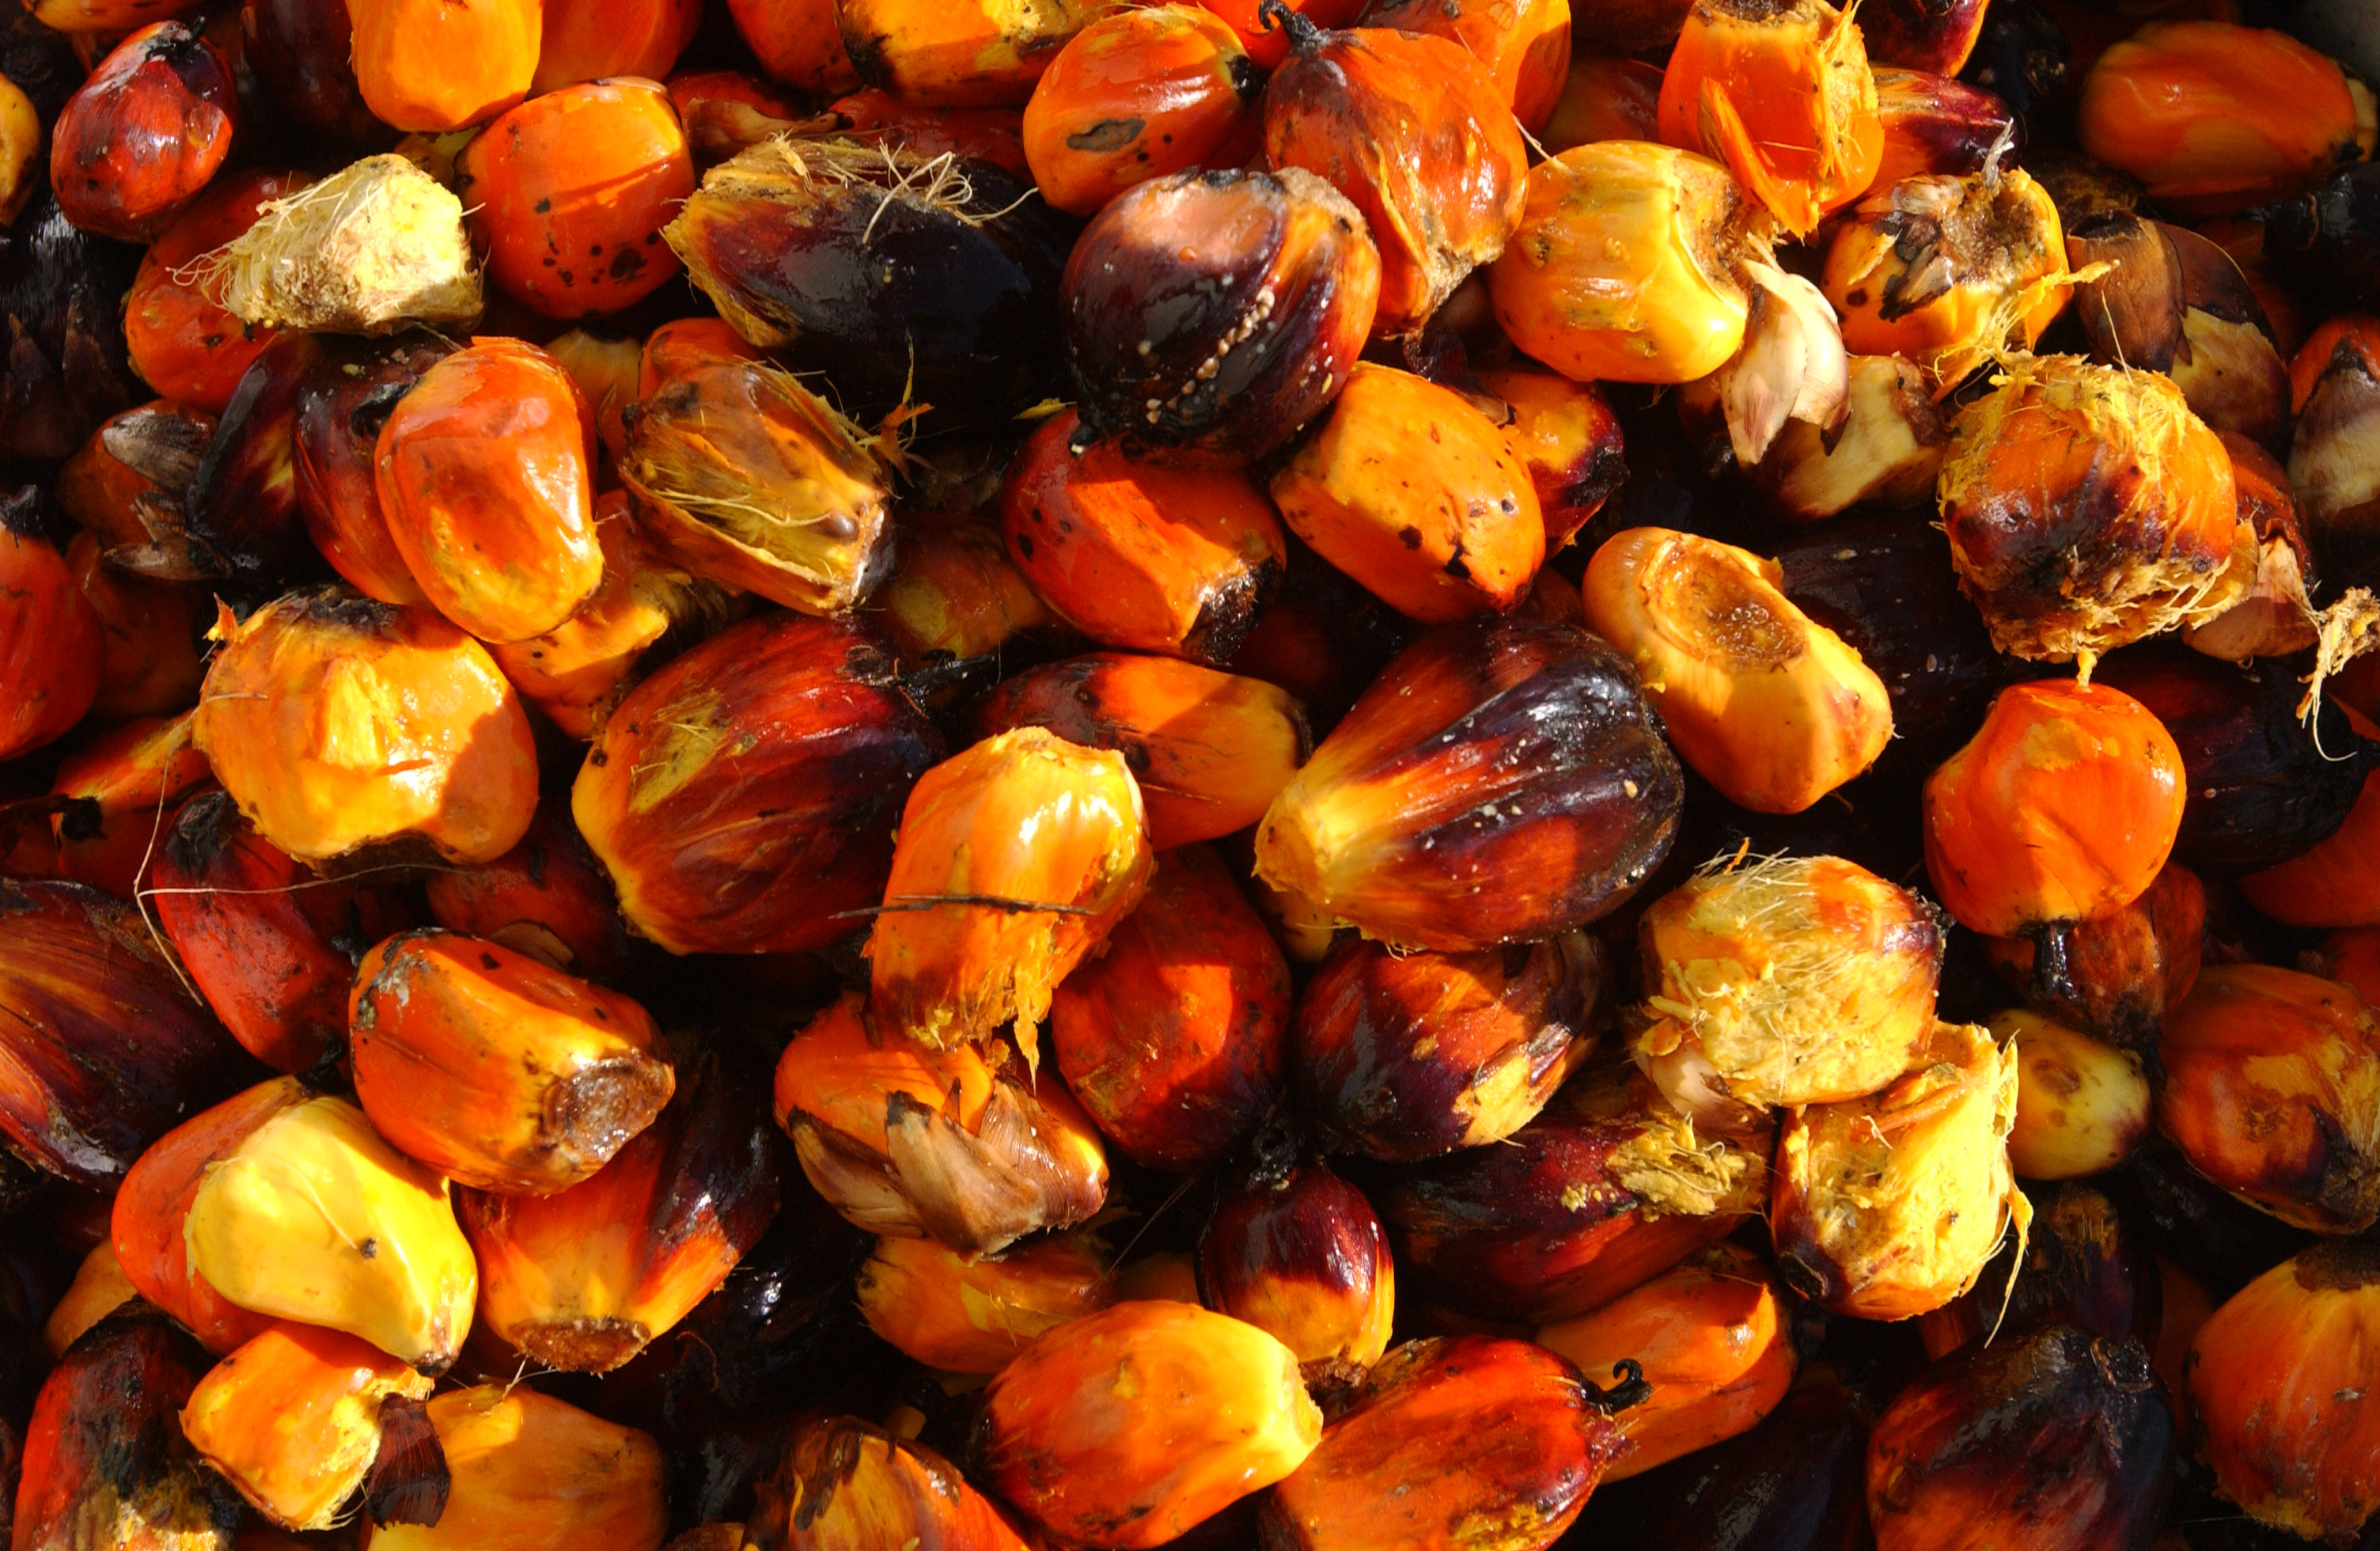 Palm date for processing into palm oil